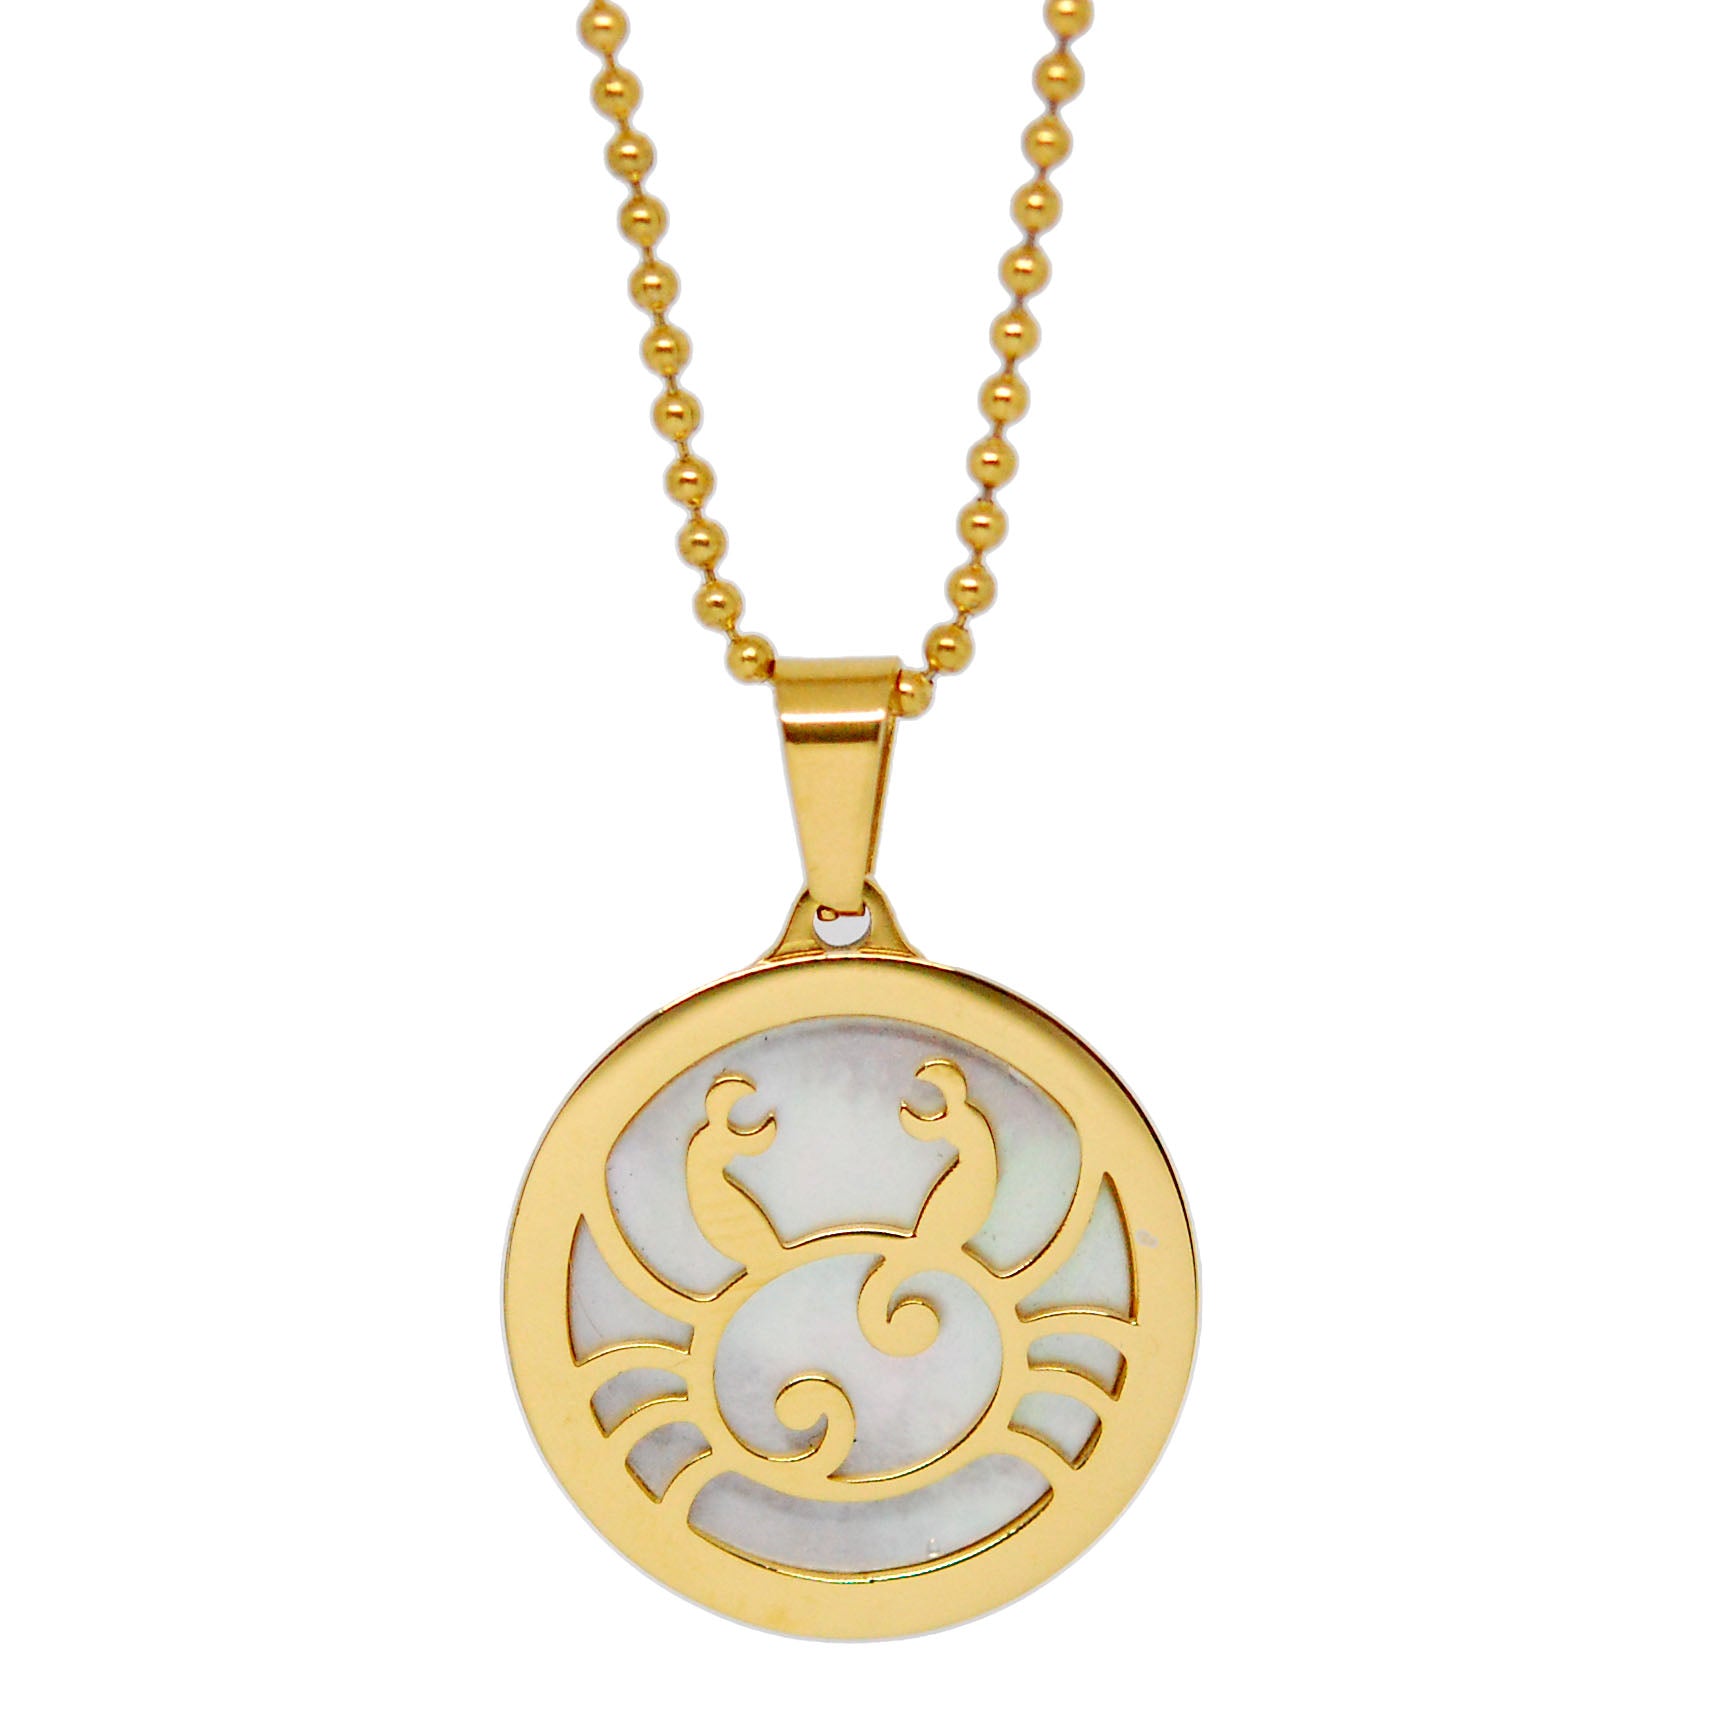 ESN 7965: All IPG Mop Cancer Zodiac Necklace w/ 18" IPG Ball Chain